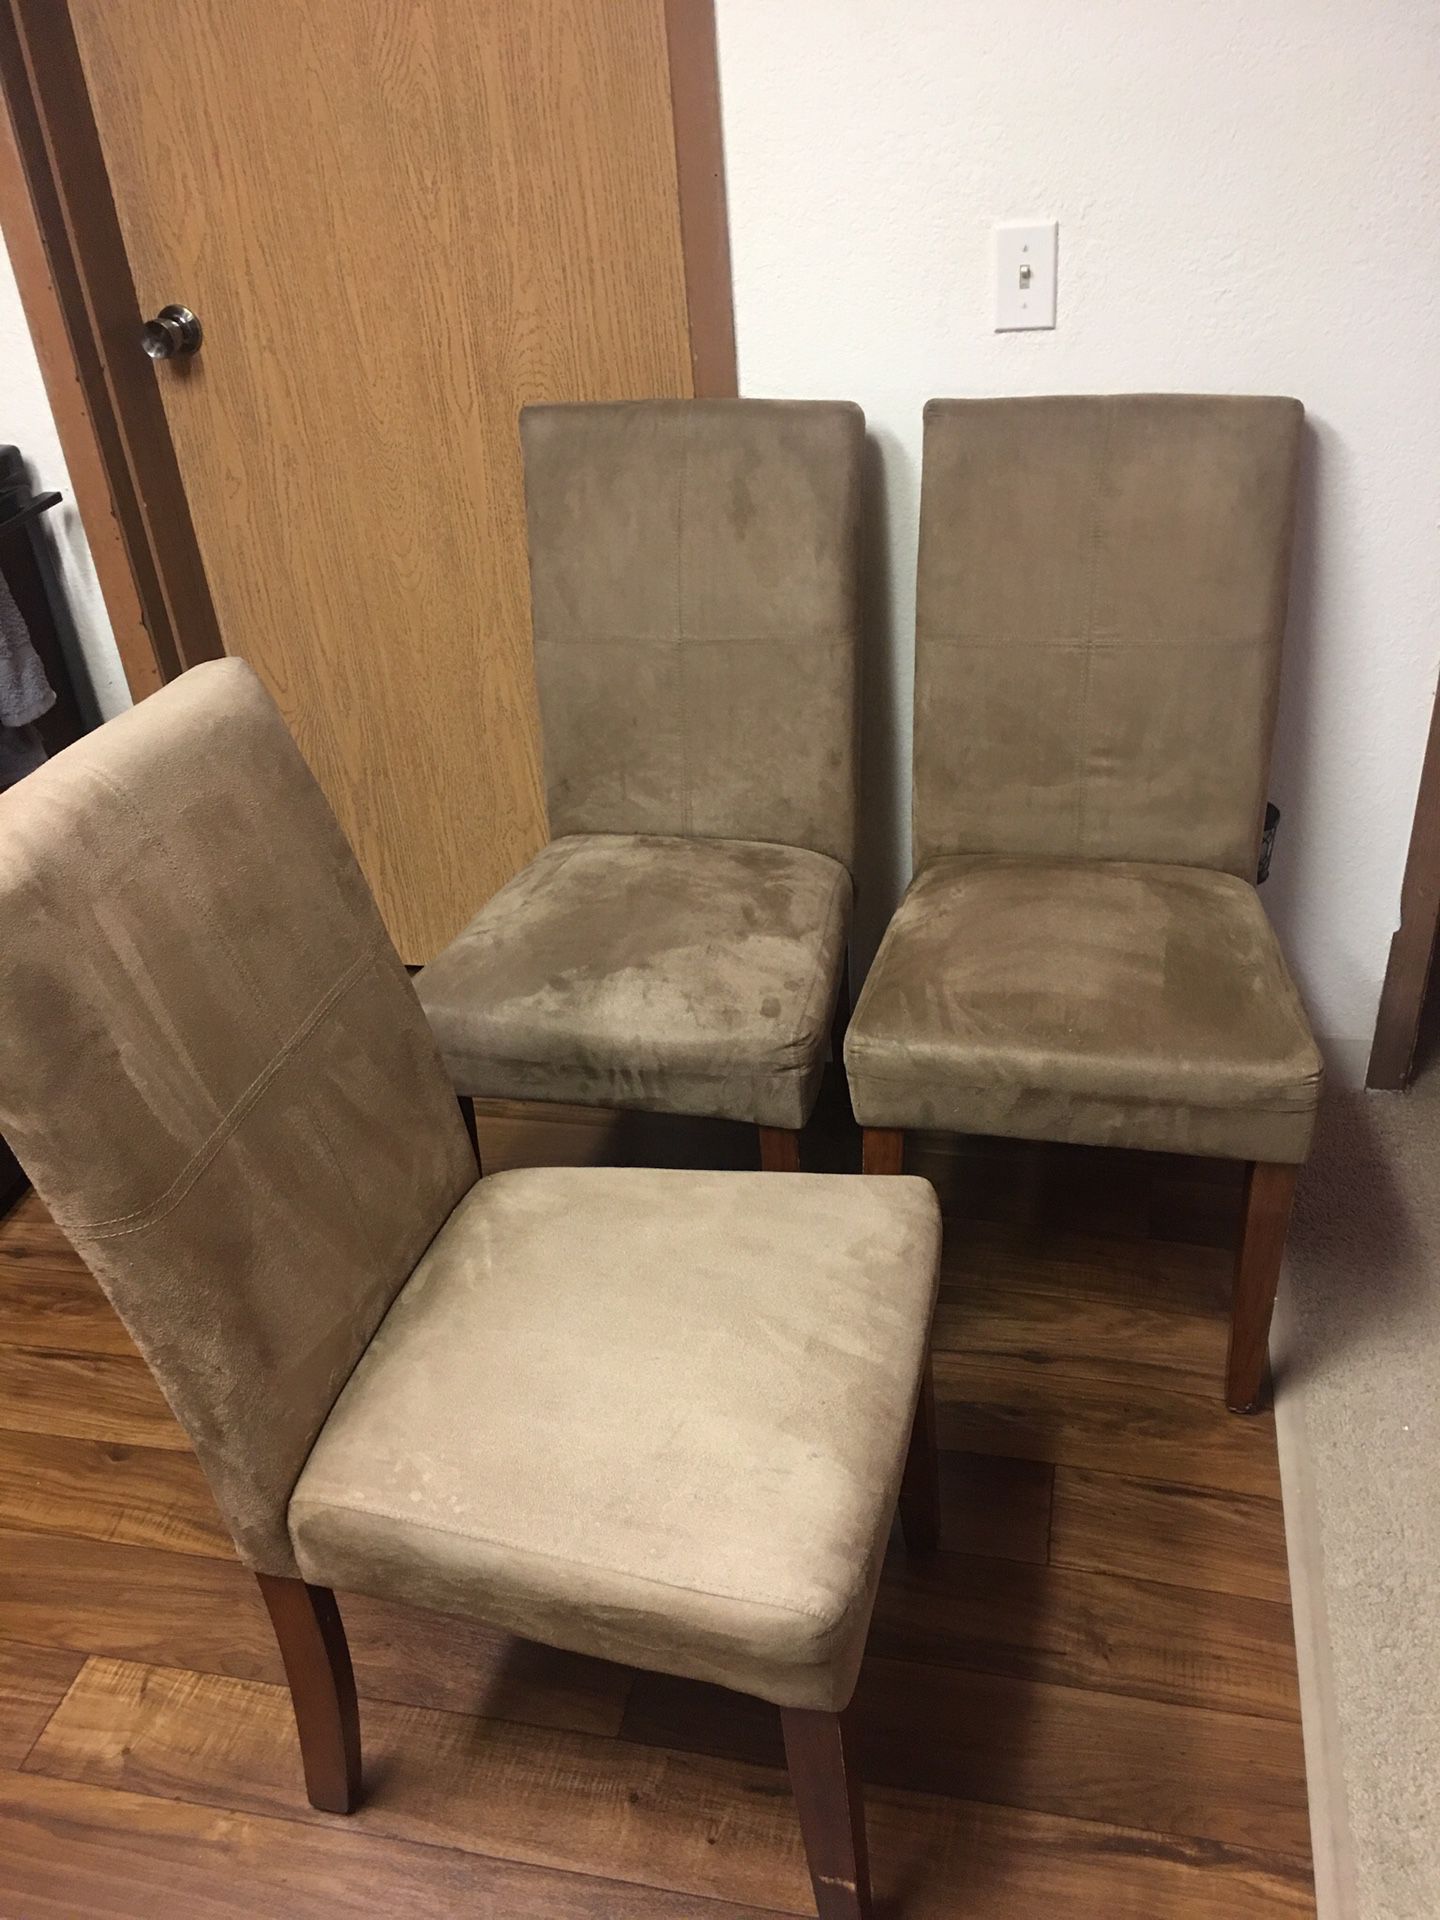 3 Dining Table Chairs